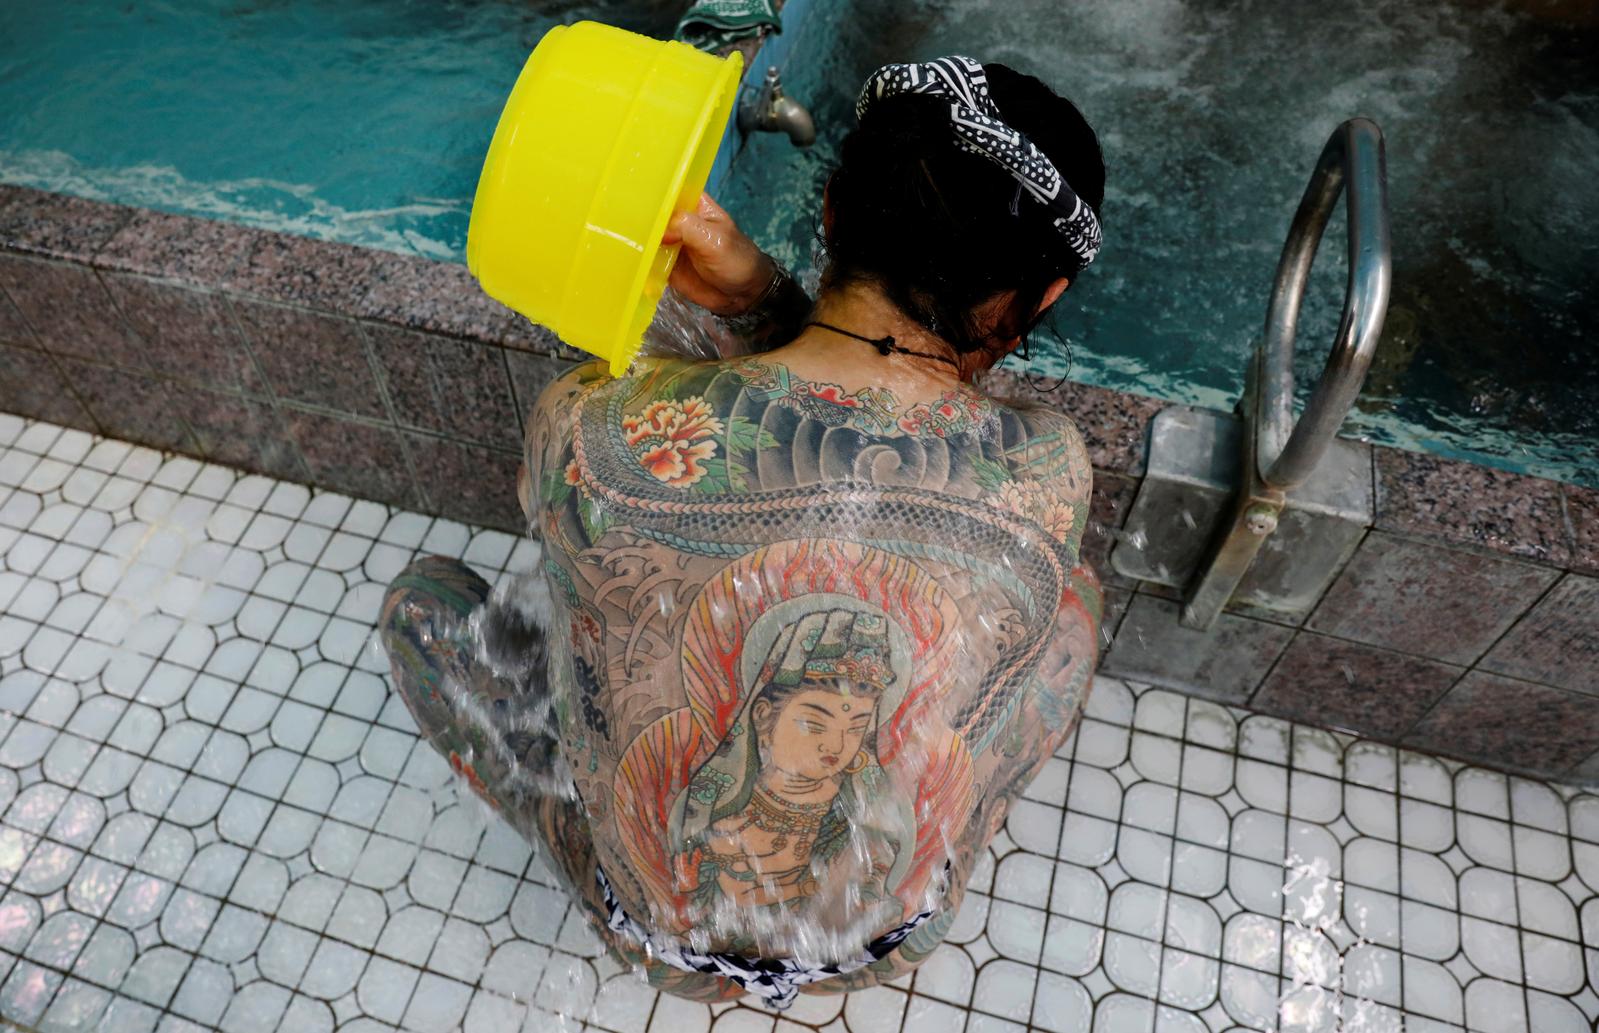 Construction worker Hiraku Sasaki, 48, washes his body at a Japanese public bath called a 'sento', as he gets together with tattoo artist Asakusa Horikazu to pose for photographs in Tokyo, Japan, September 24, 2020. Photo: Reuters